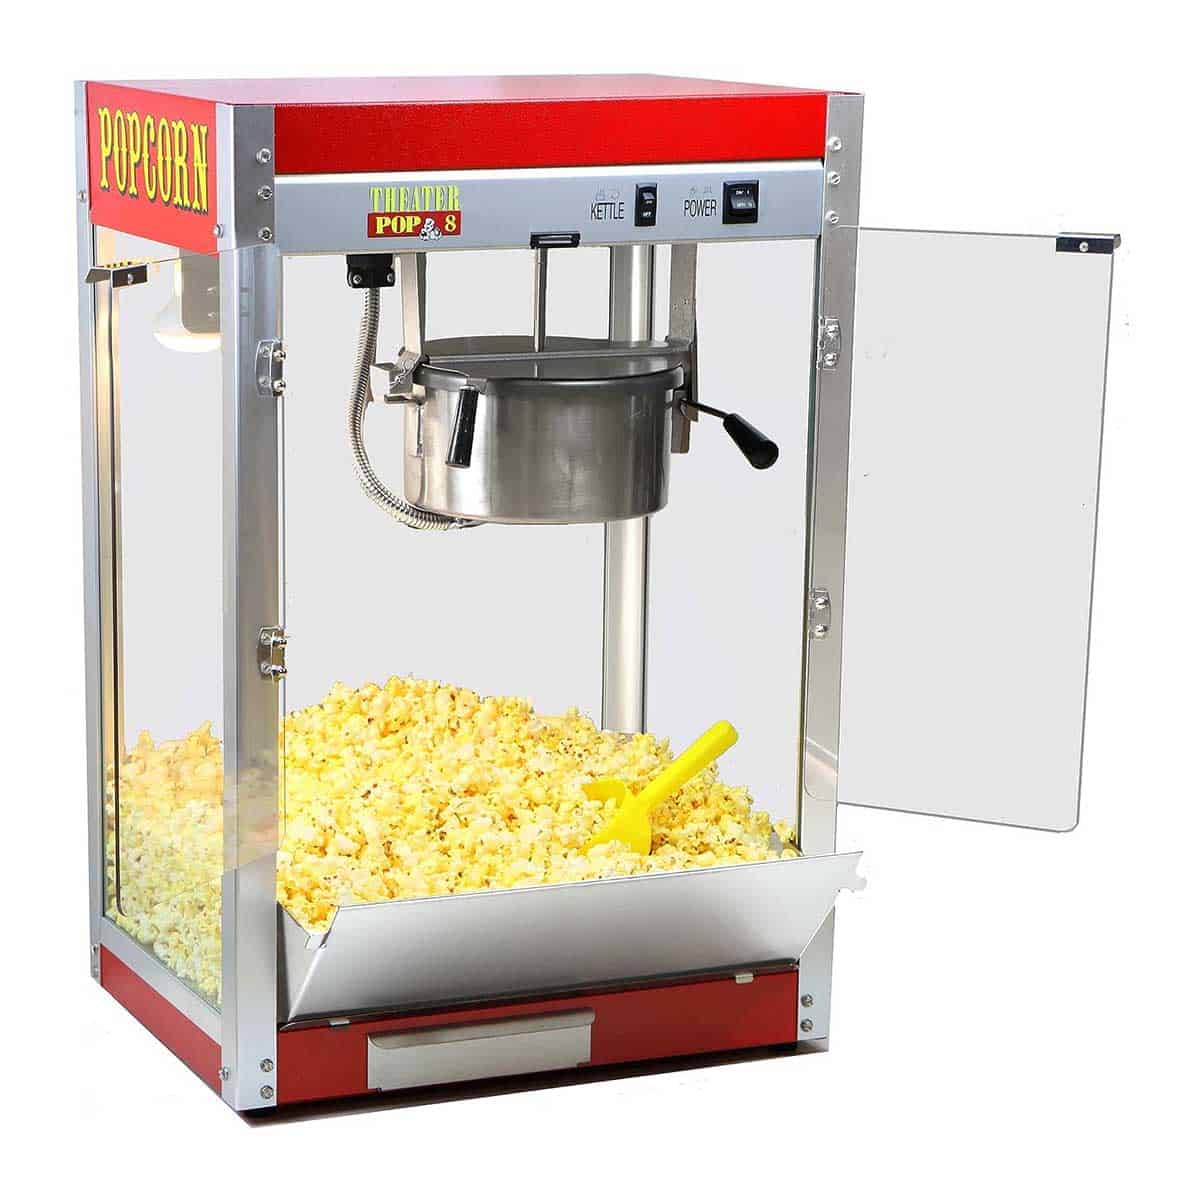 Paragon Theater Popcorn Machine Review